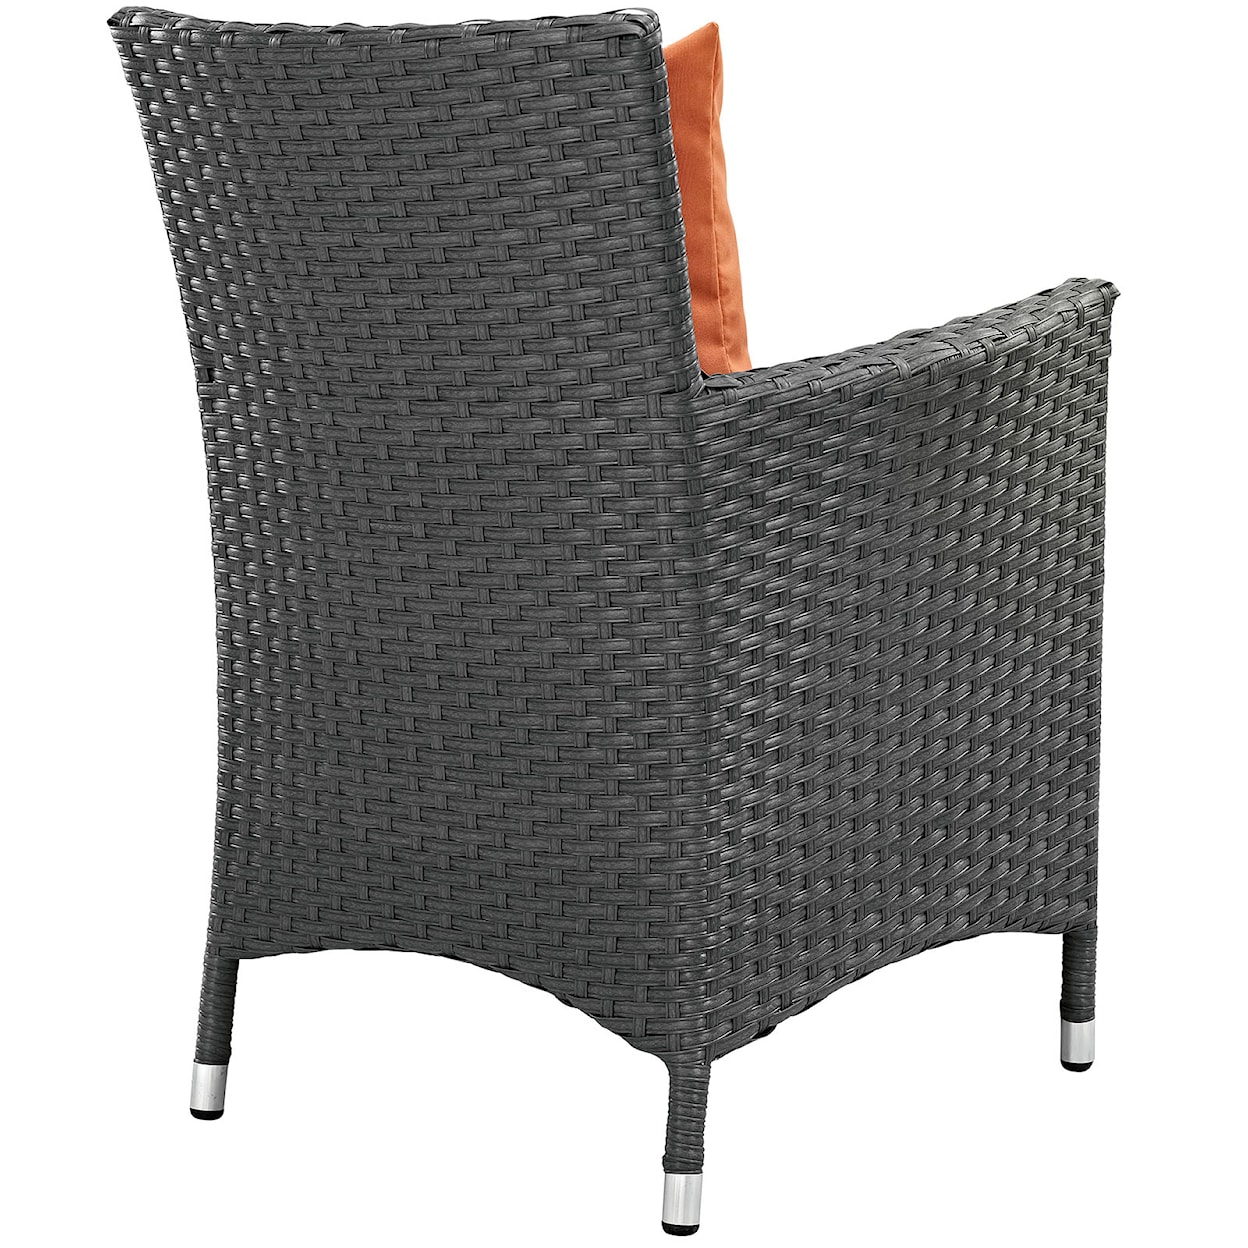 Modway Sojourn Outdoor Dining Armchair